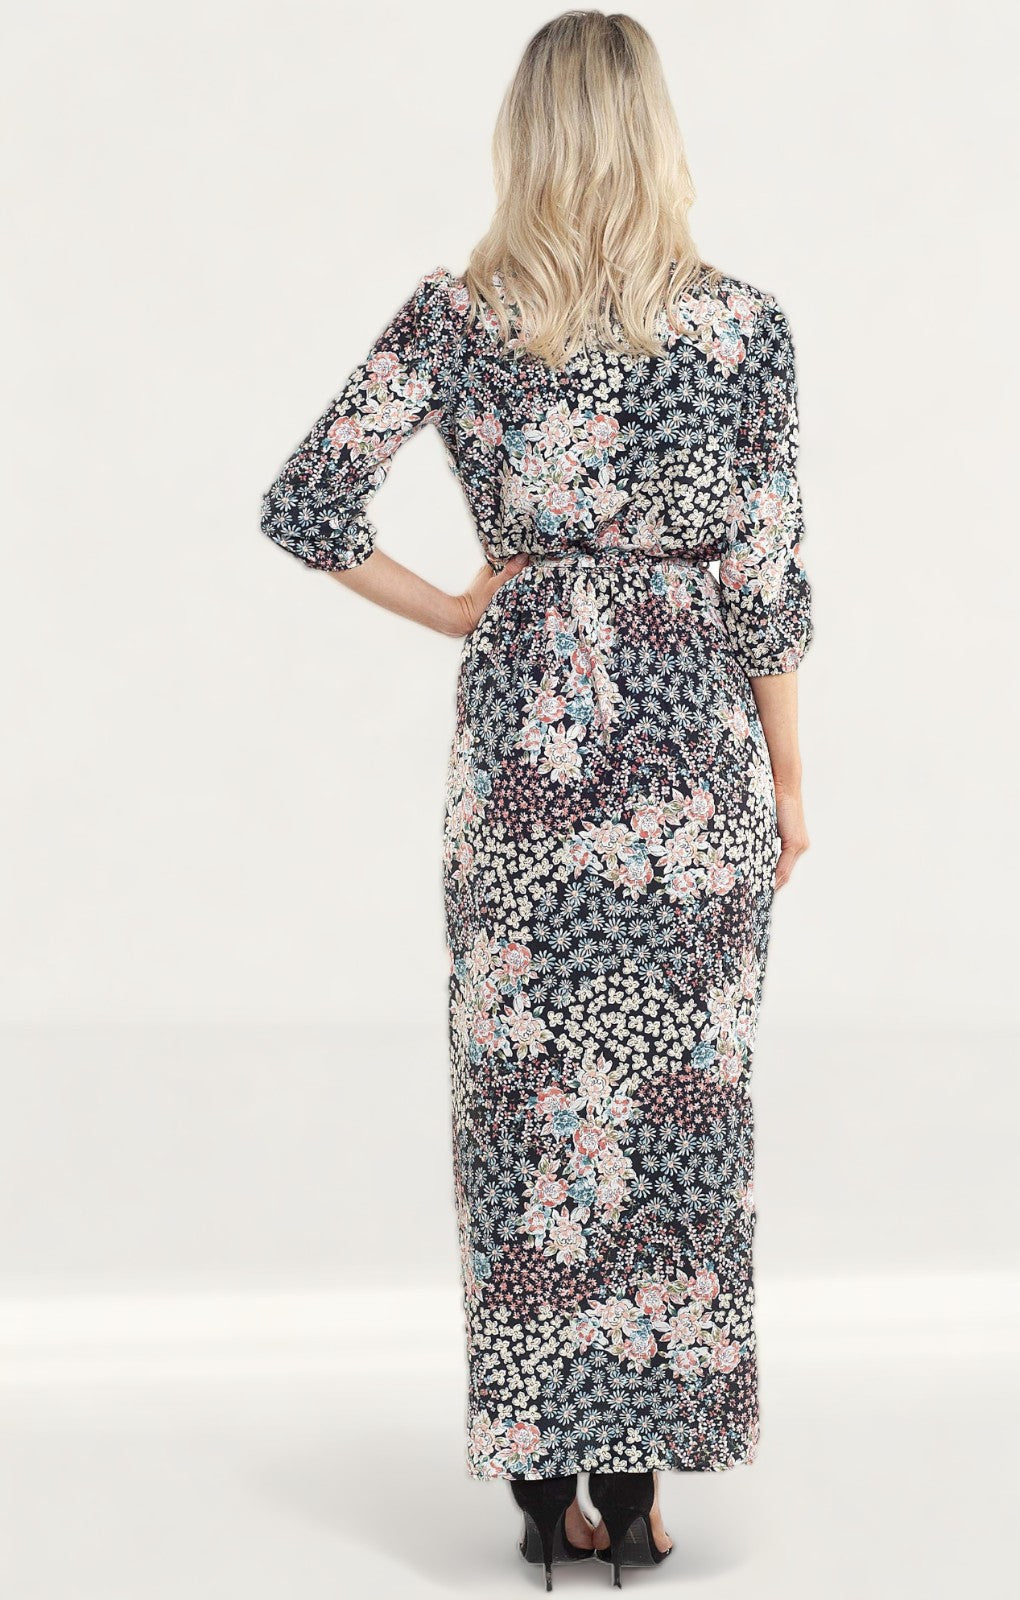 Never Fully Dressed Floral Gabriella Maxi Dress product image